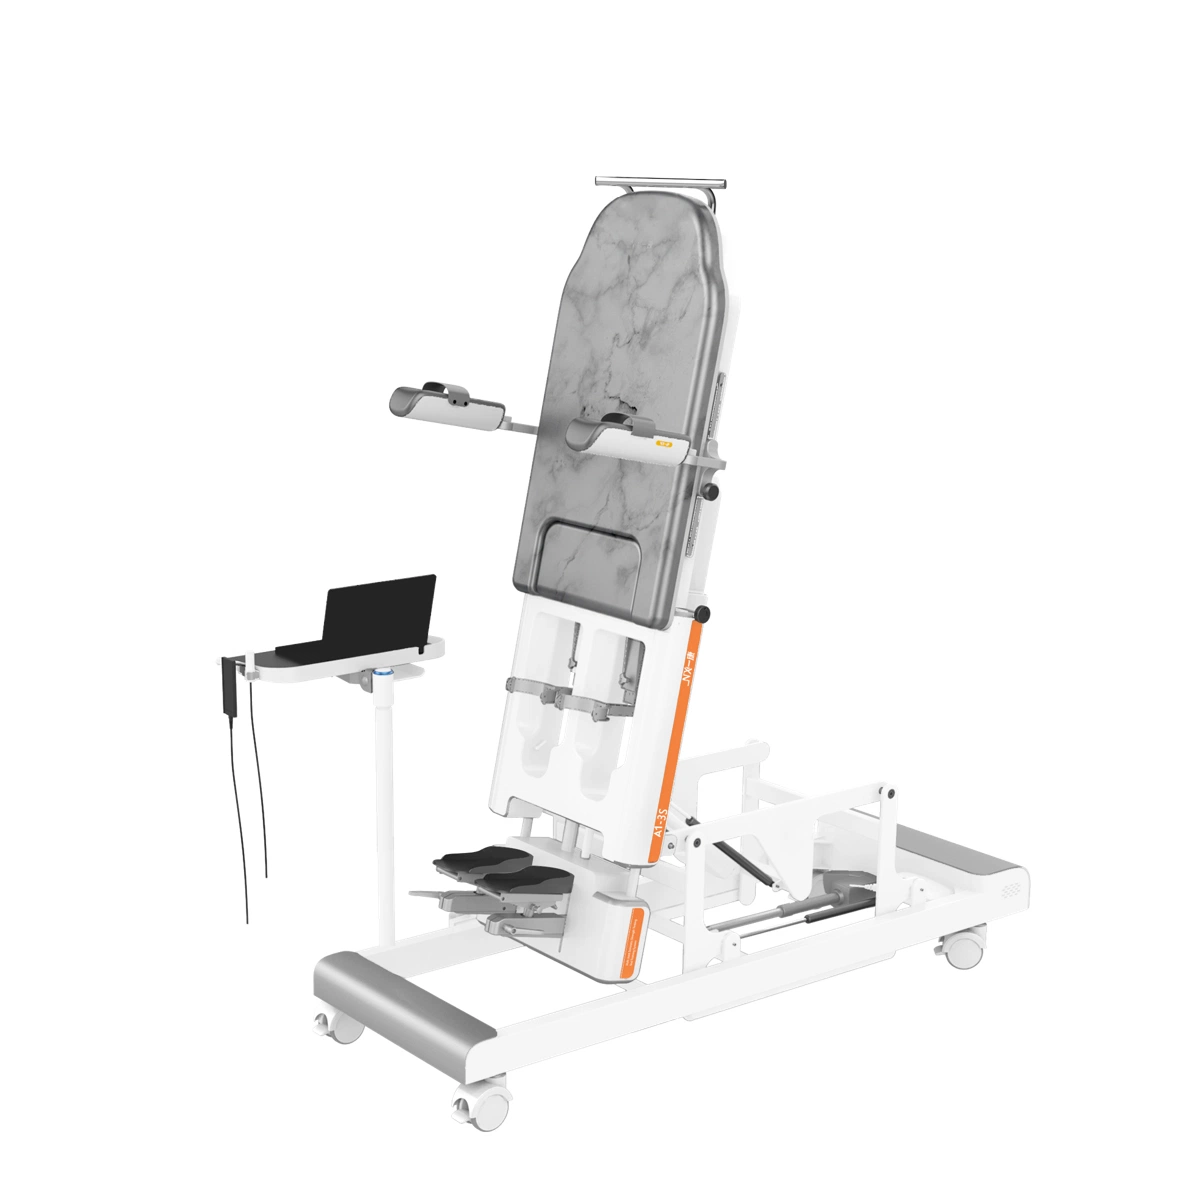 Physiotherapy Equipment Lower Limb Paralyzed Medical Rehabilitation Equipment